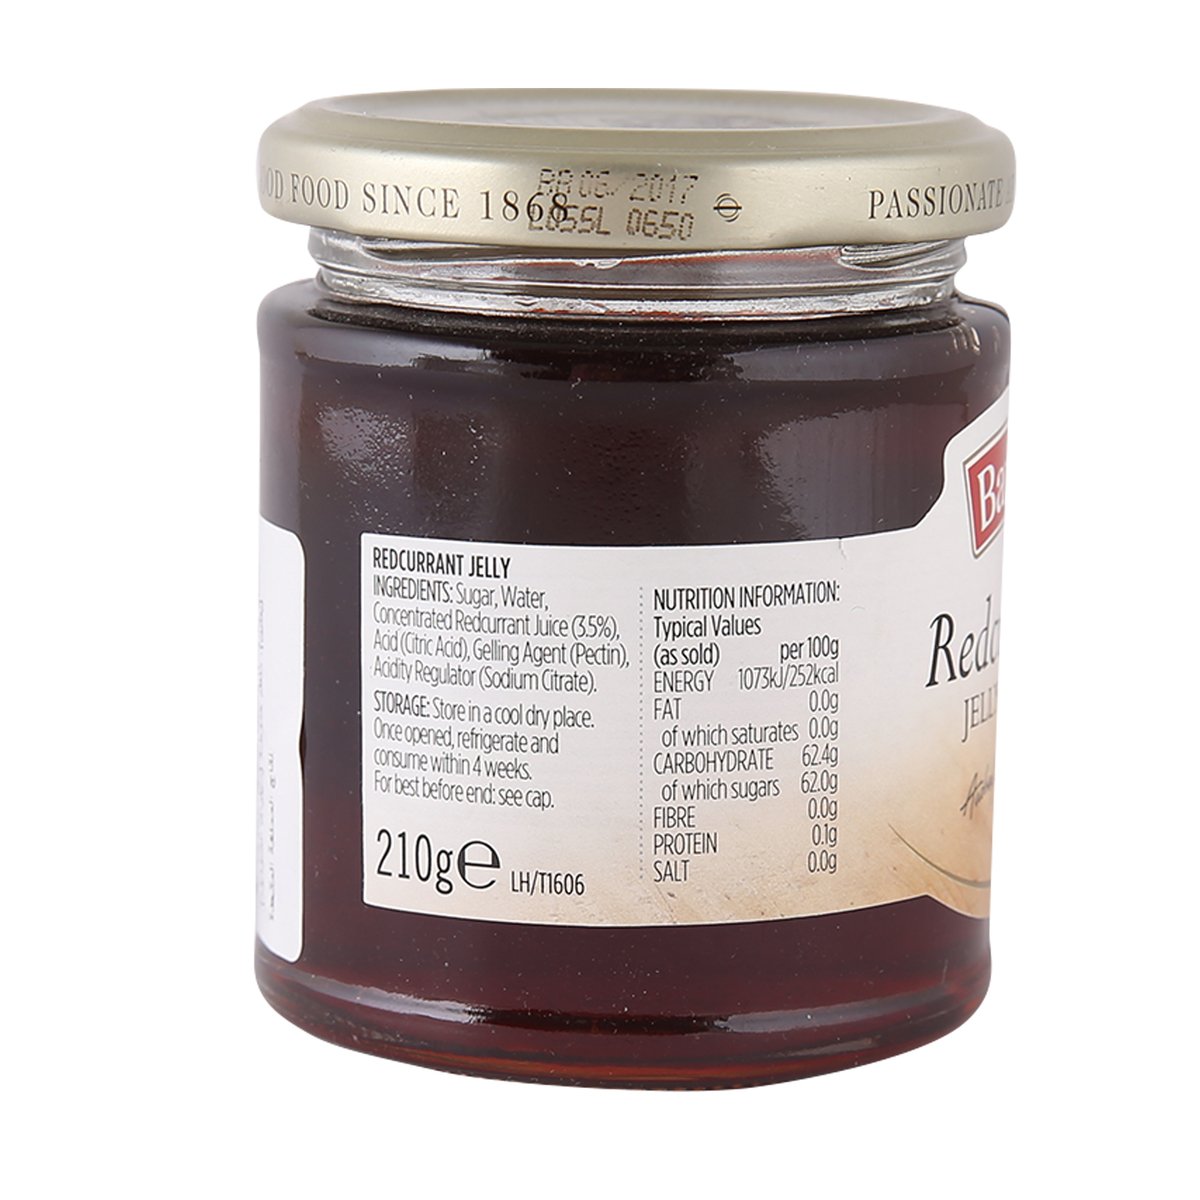 Baxters Redcurrant Jelly 210 g